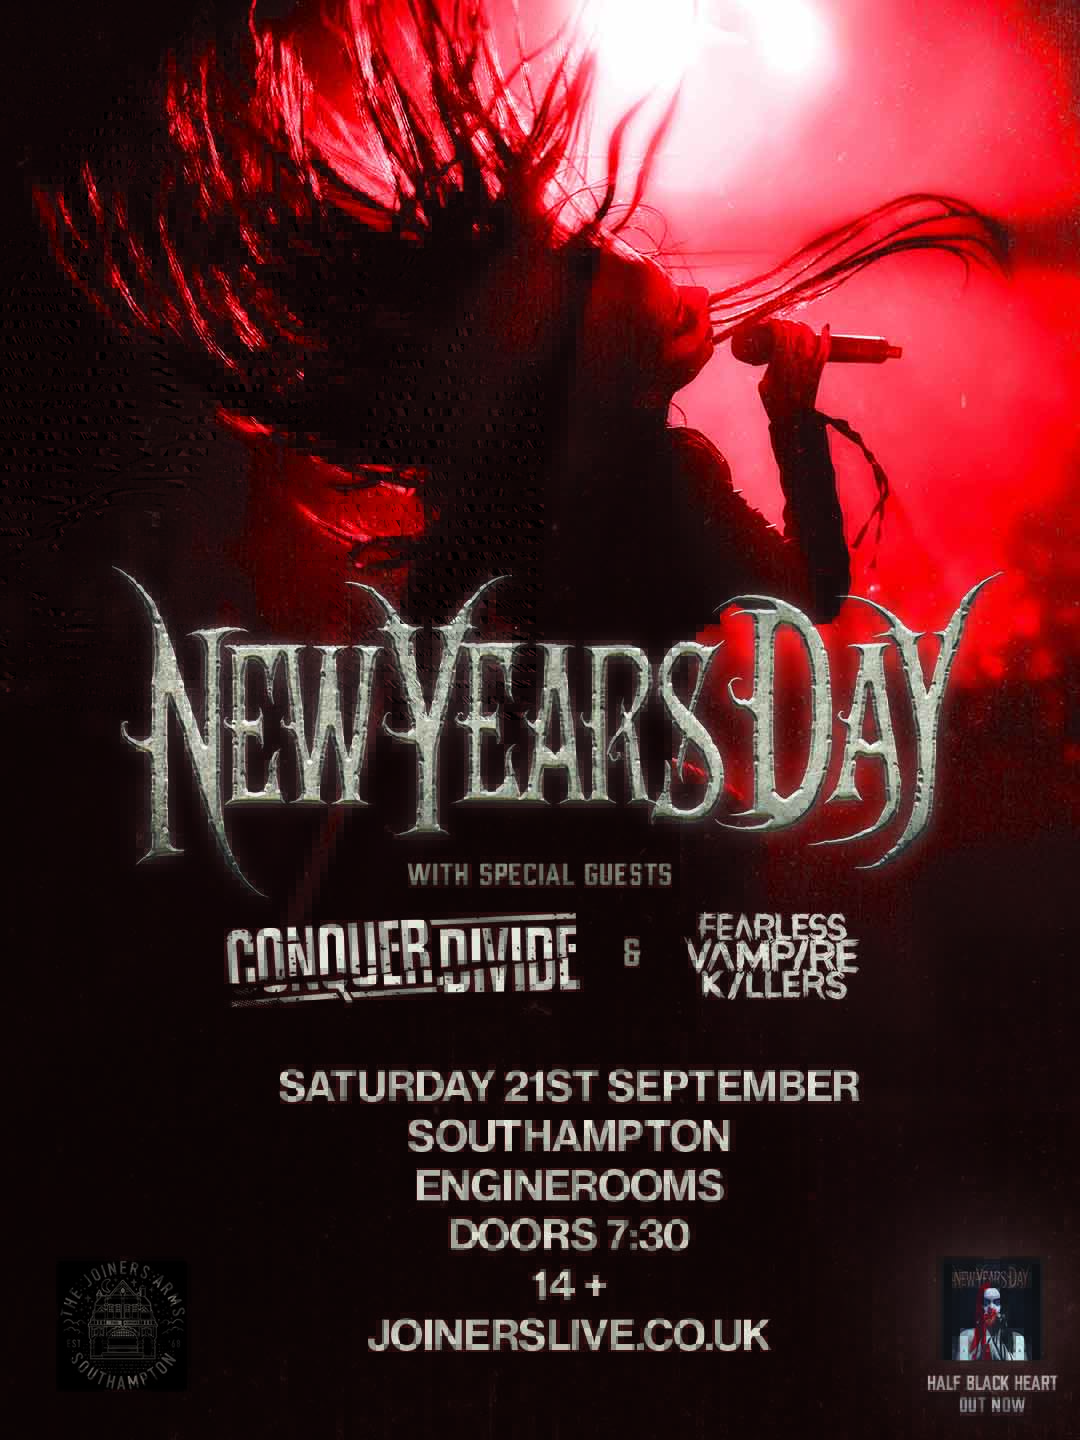 NEW YEARS DAY AT ENGINE ROOMS